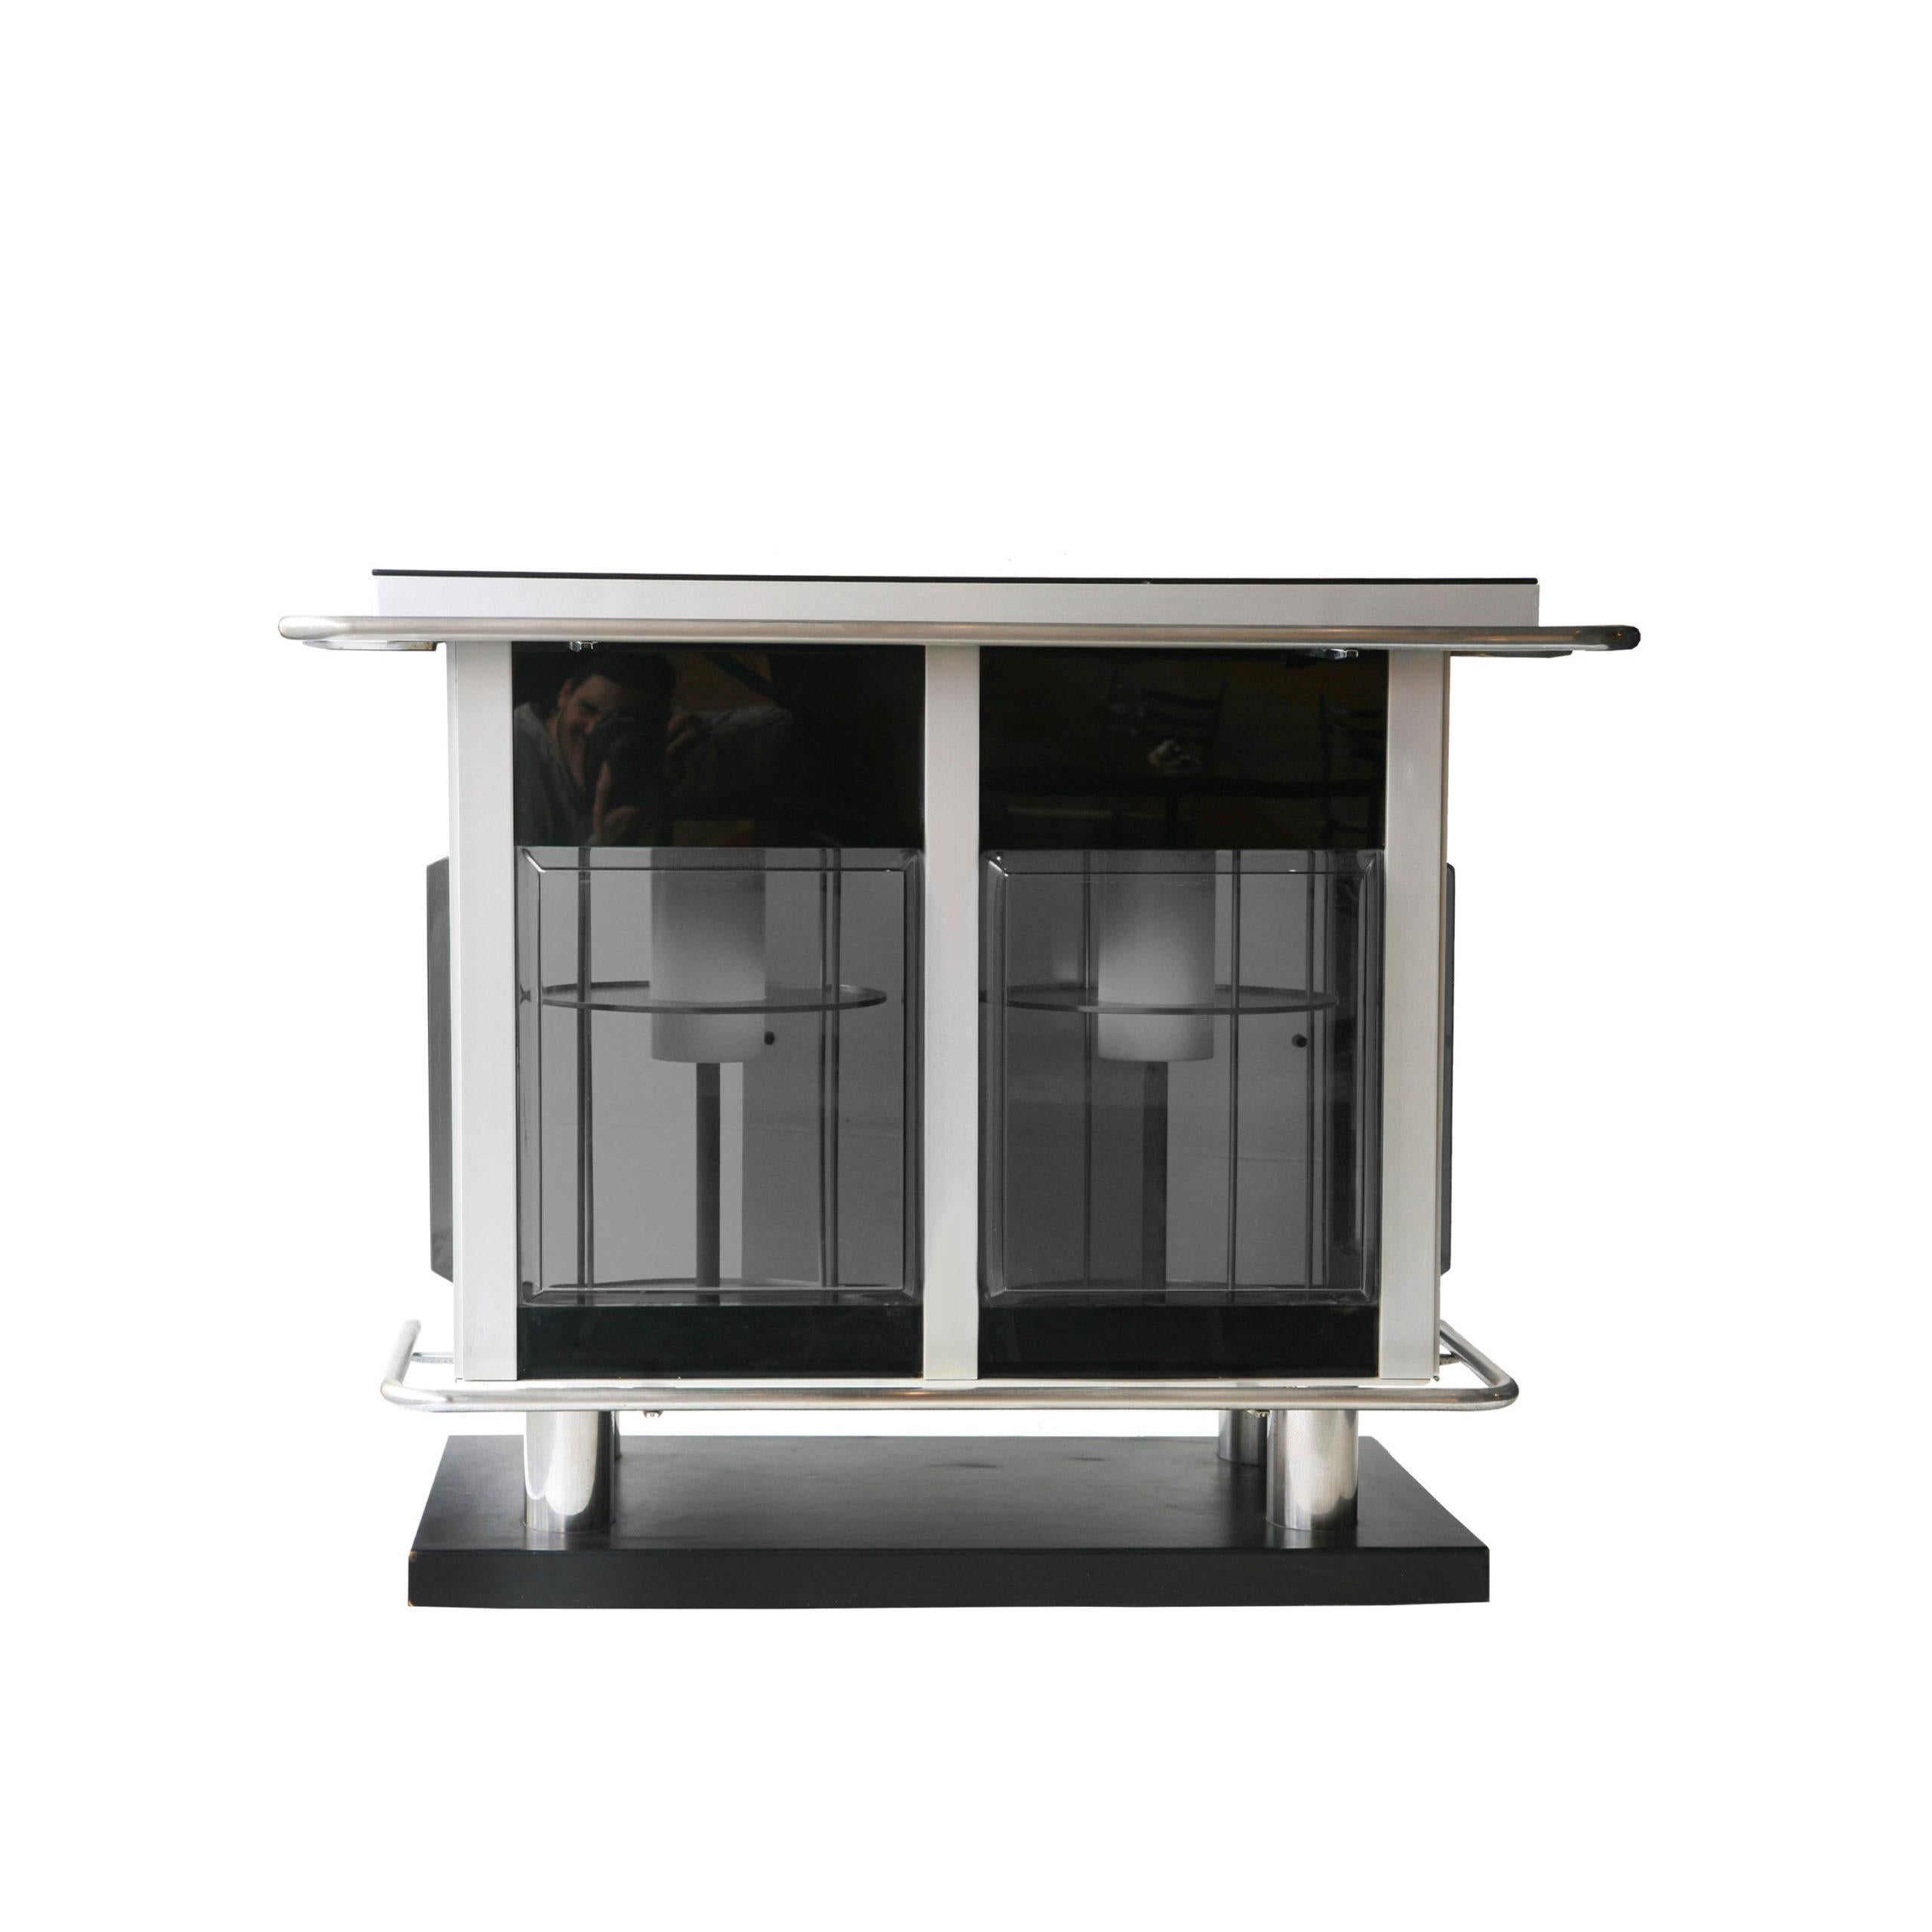 Italian grey bar counter. It consists of a laminated wood structure and base, a semi-transparent gray Perplex shade and chromed steel tube details. The Interior part contains a backlit rotating bottle rack and 2 light sources.